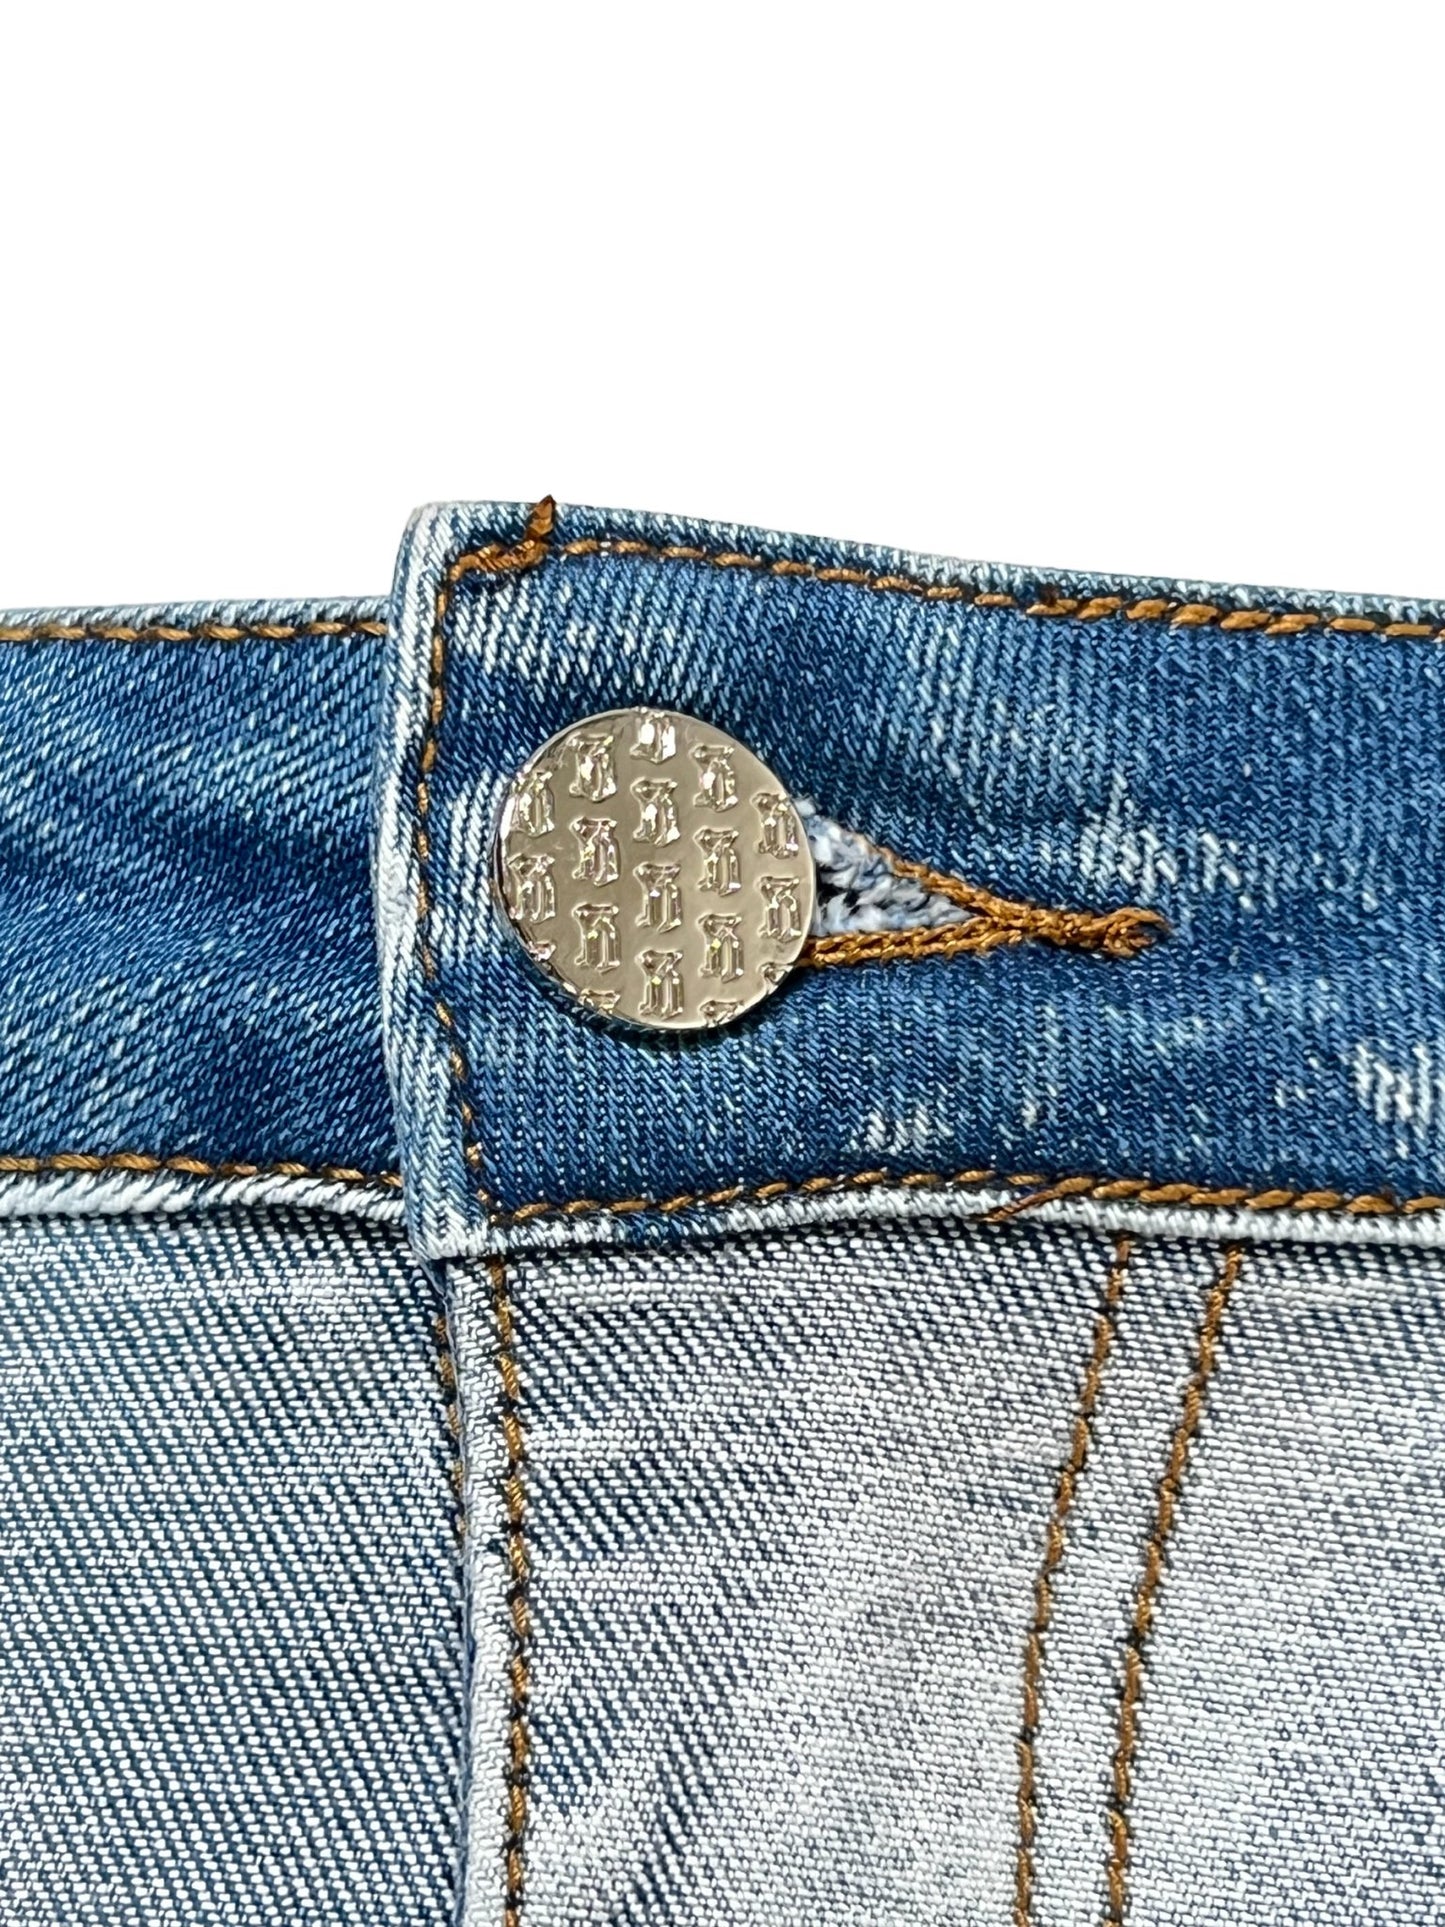 Close-up of a metal button on GUAPI VINTAGE BLUE WAVY DENIM by GUAPI.